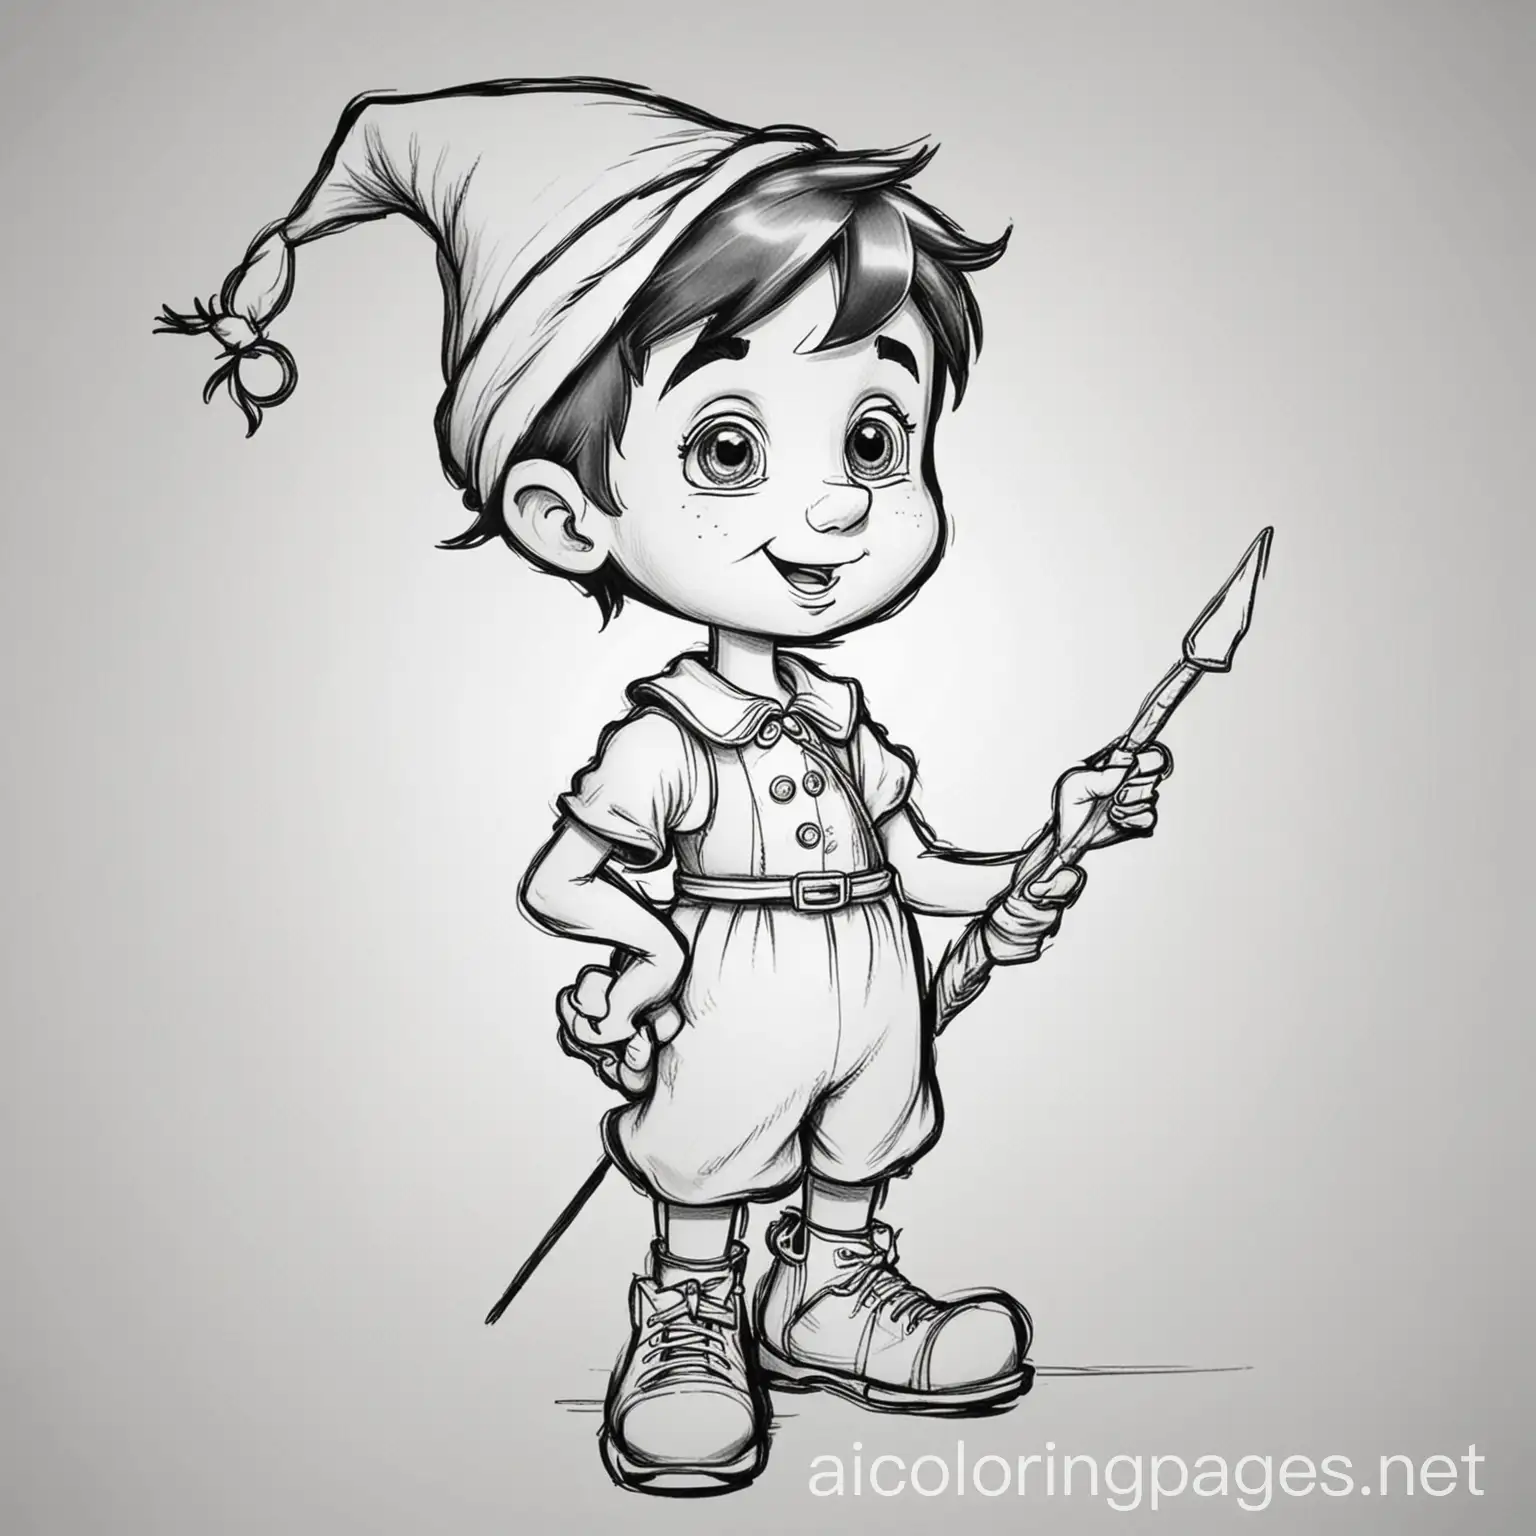 Pinocchio-Coloring-Page-Simple-Line-Art-for-Kids